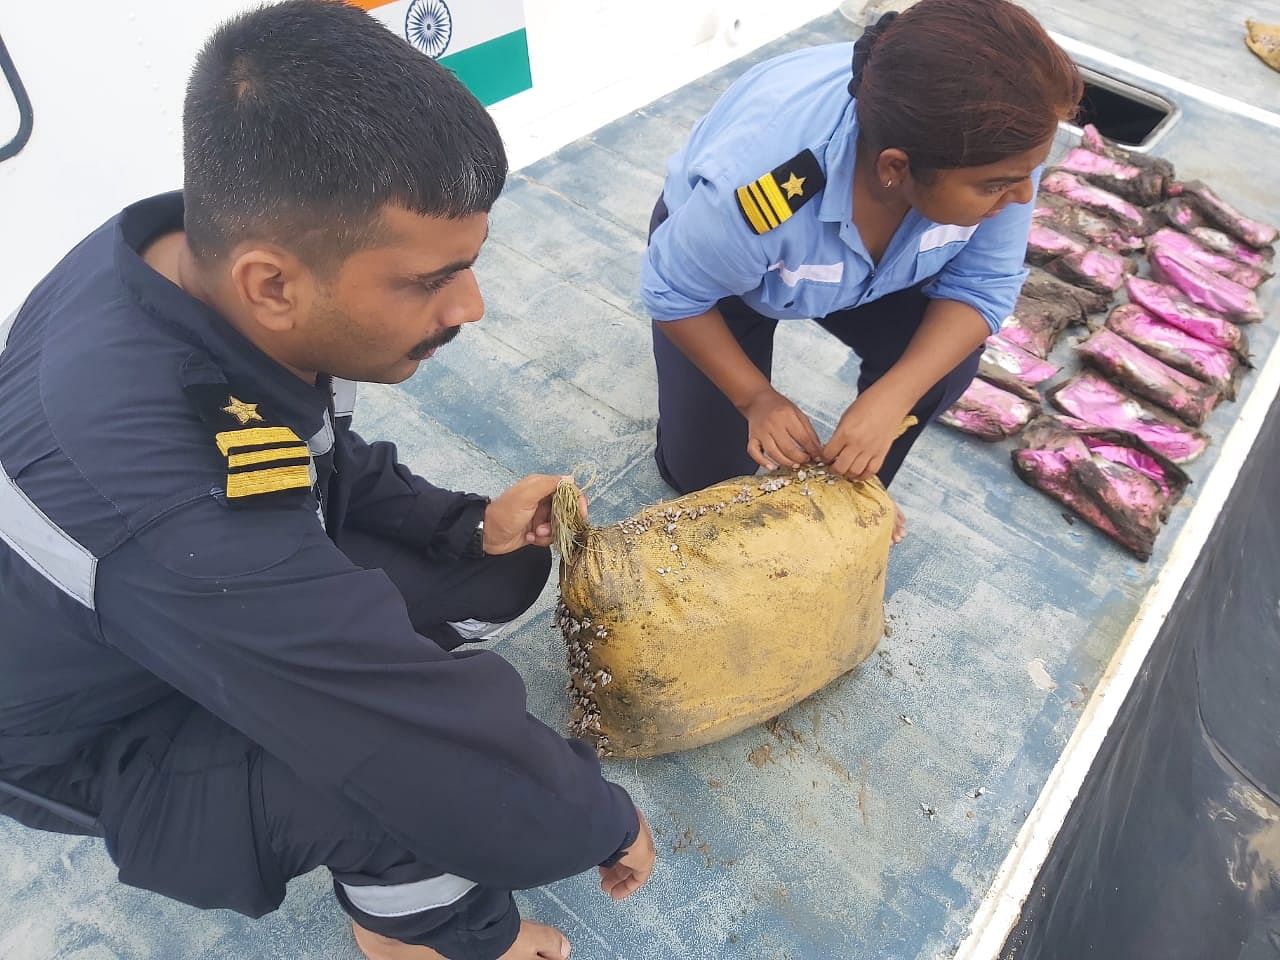 Indian Coast Guard recently recovered 88 packets of charas in Kutch